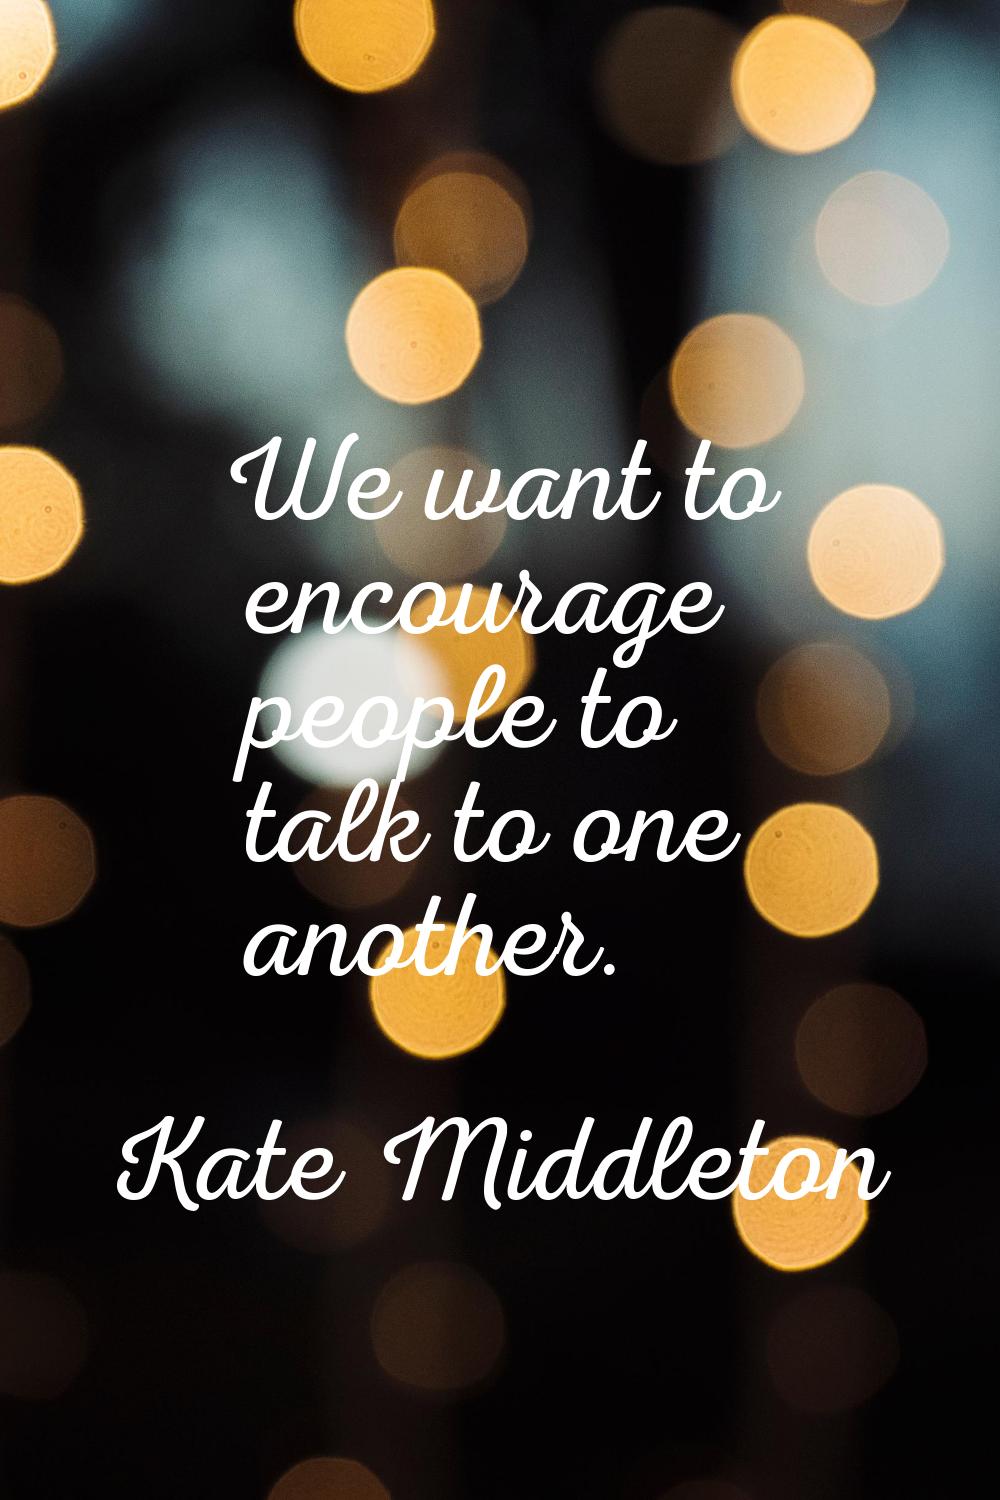 We want to encourage people to talk to one another.